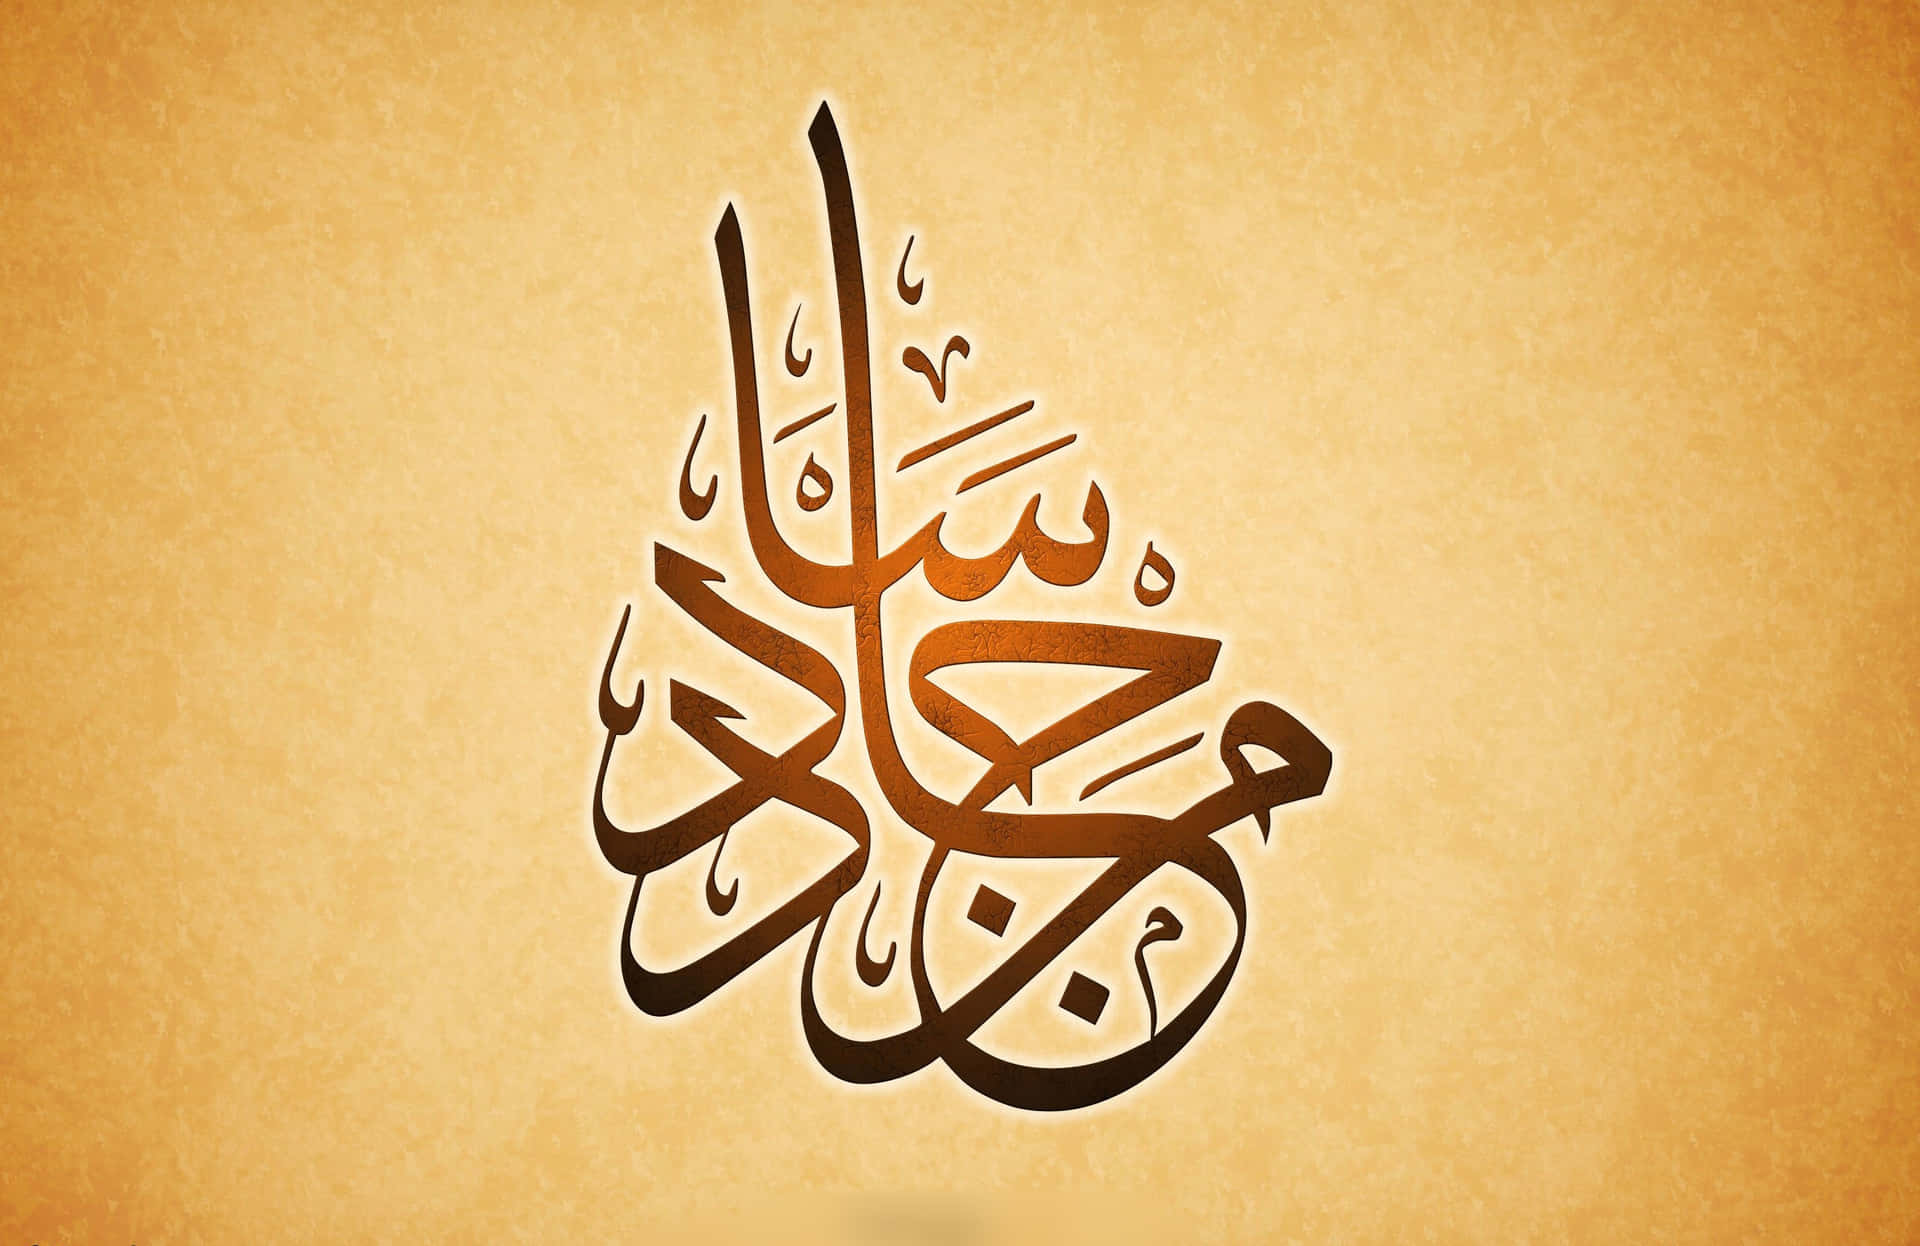 Arabic script used in calligraphy to express literature.